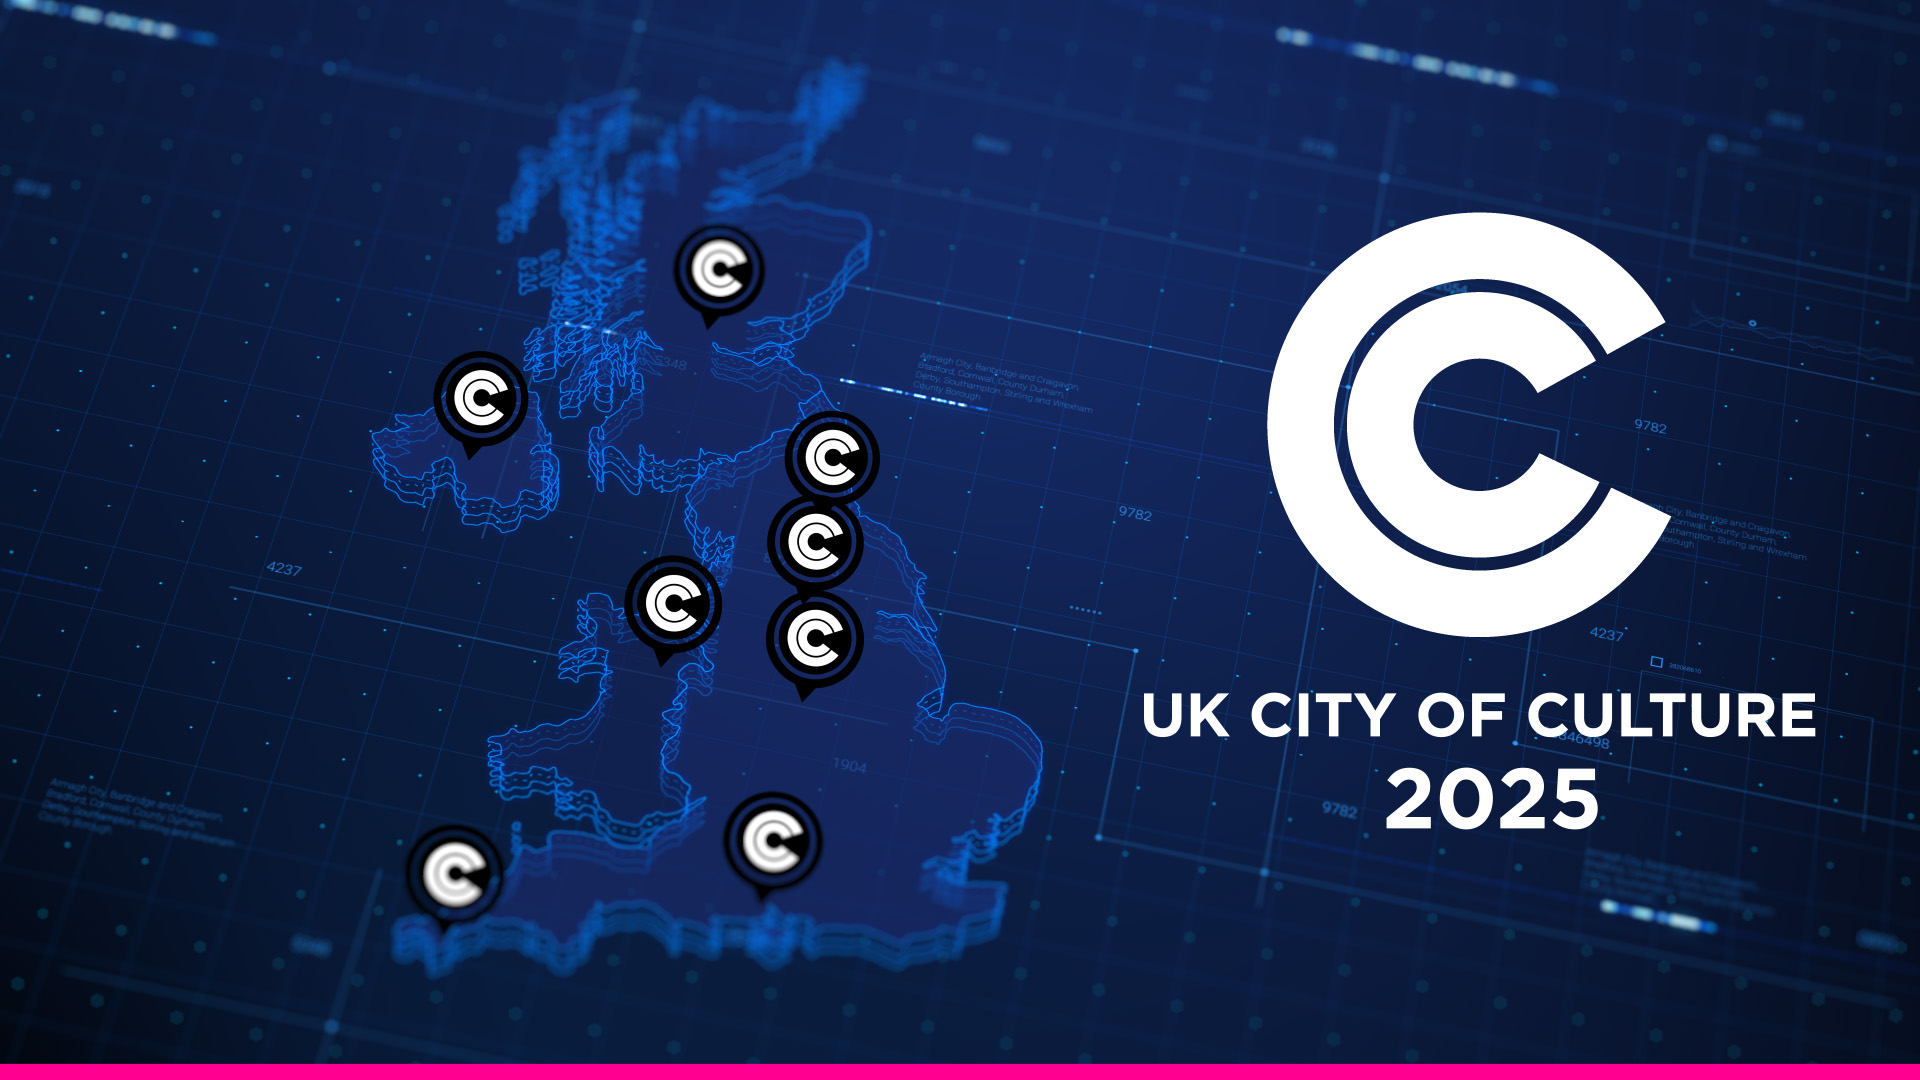 blue image of the UK map with dots on uk cities with white circle saying UK city of culture 2025